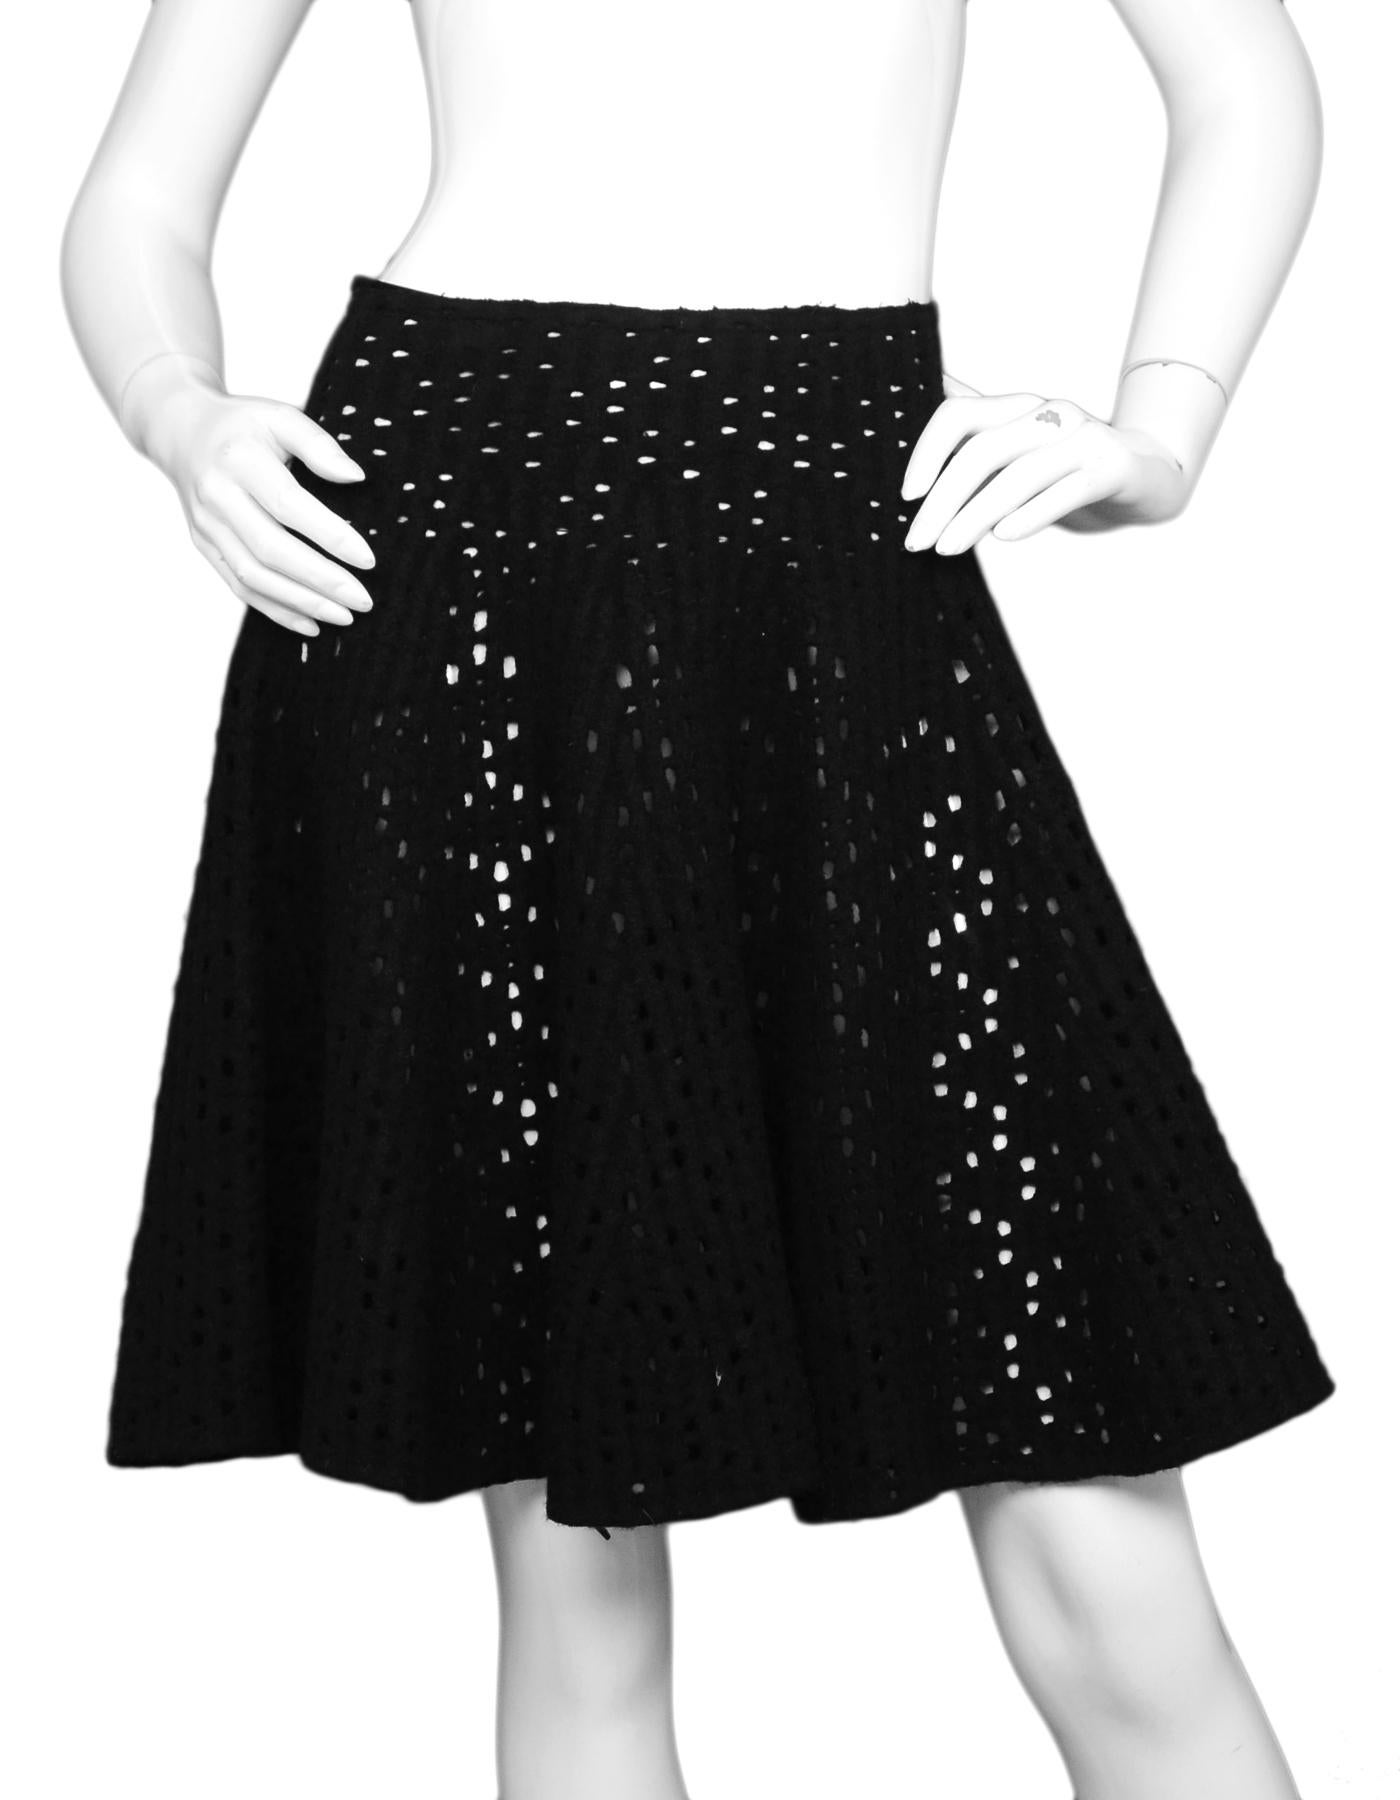 Alaia Black Wool Eyelet Flare Skirt Sz IT 42

Made In:  Italy
Color: Black
Materials: 65% wool, 35% nylon
Lining:  Unlined
Closure/Opening: Hidden back zipper
Overall Condition: Excellent pre-owned condition, unlined (no slip)

Measurements: 
Waist: